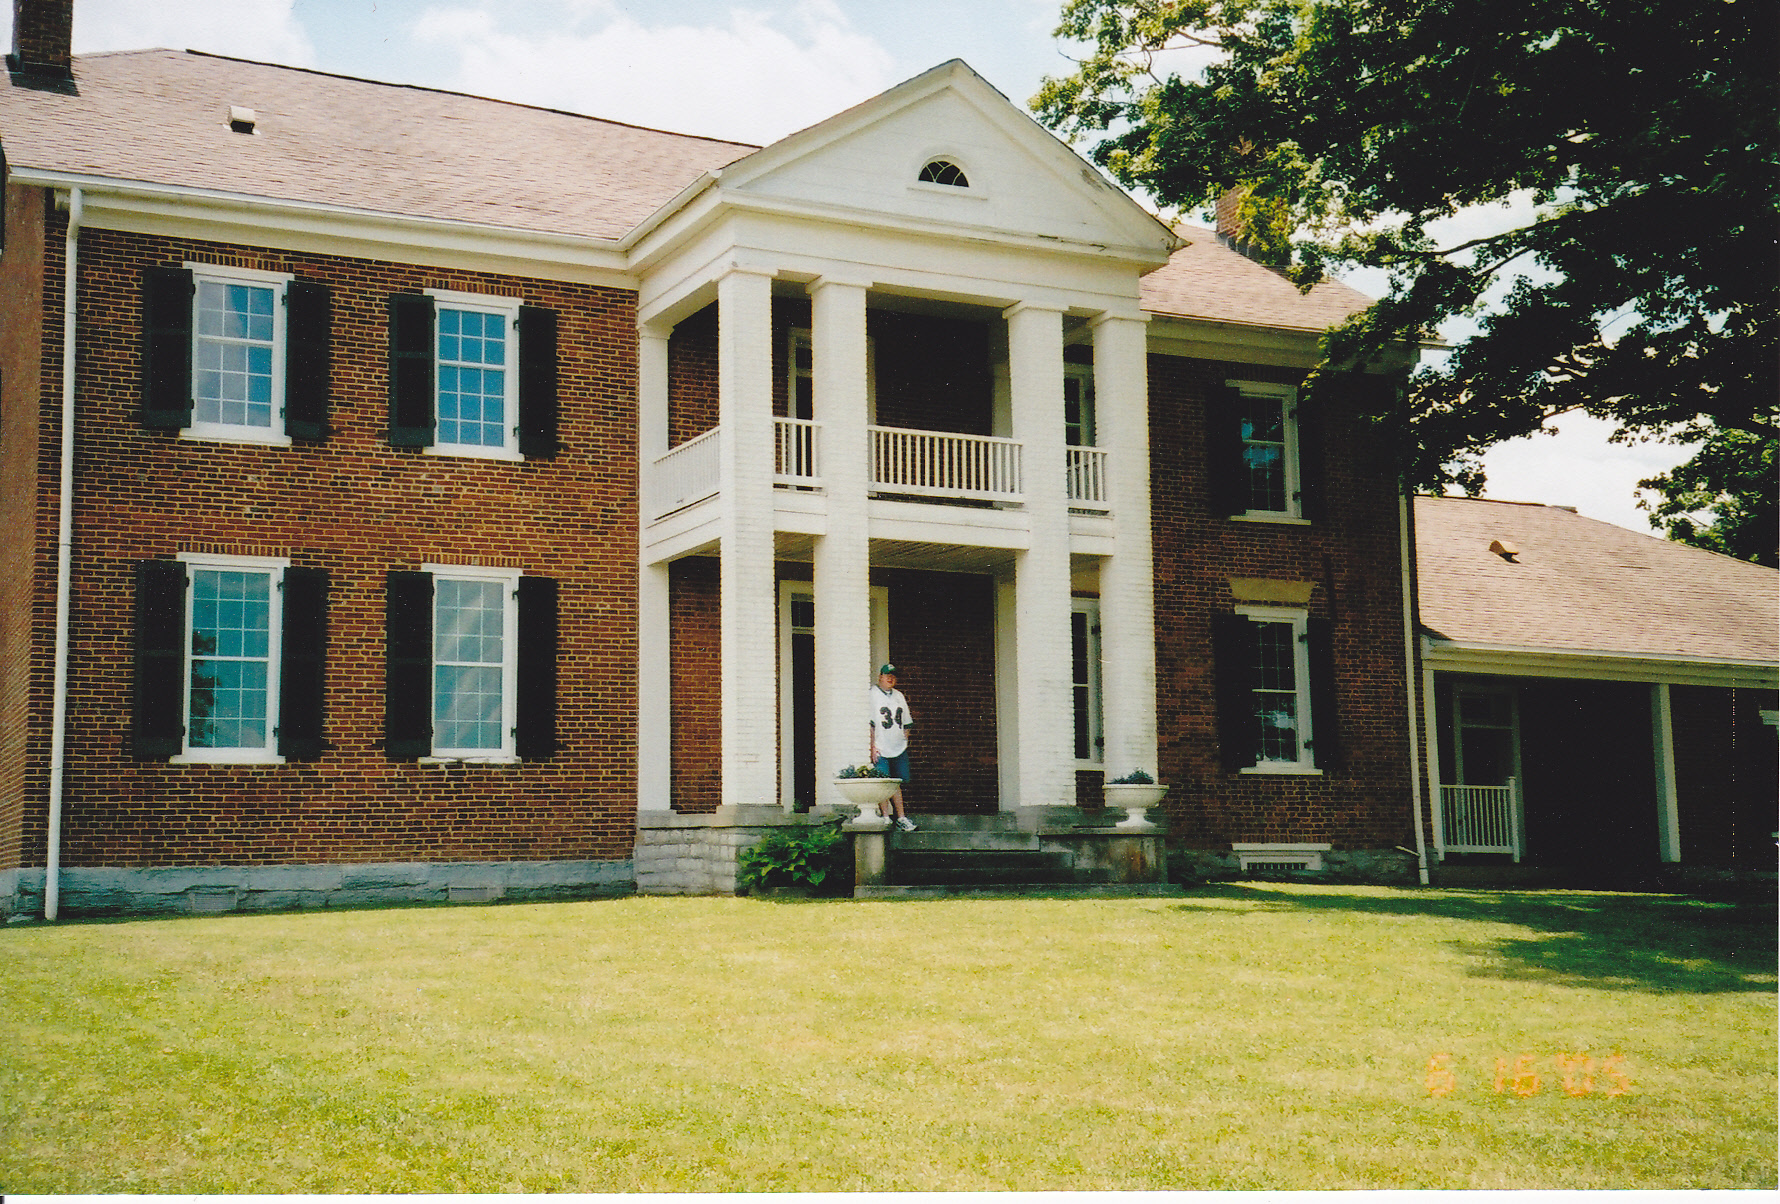 2005 Photo of Pleasant Retreat - Governor William Owsley House in Lancaster, KY